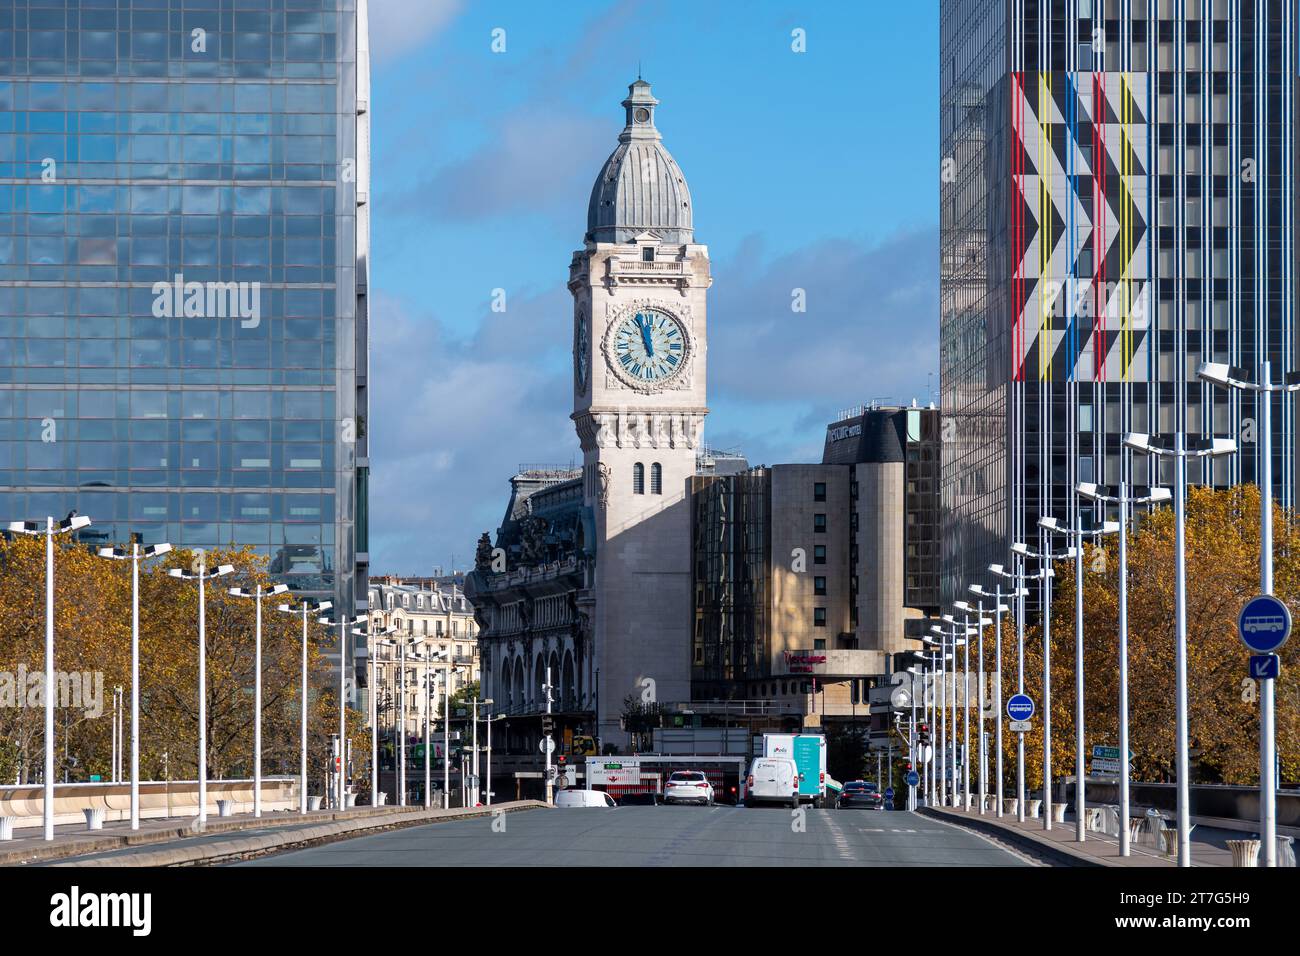 Distant view of the Clock Tower of Gare de Lyon train station, built on the occasion of the 1900 Universal Exhibition in Paris, France Stock Photo